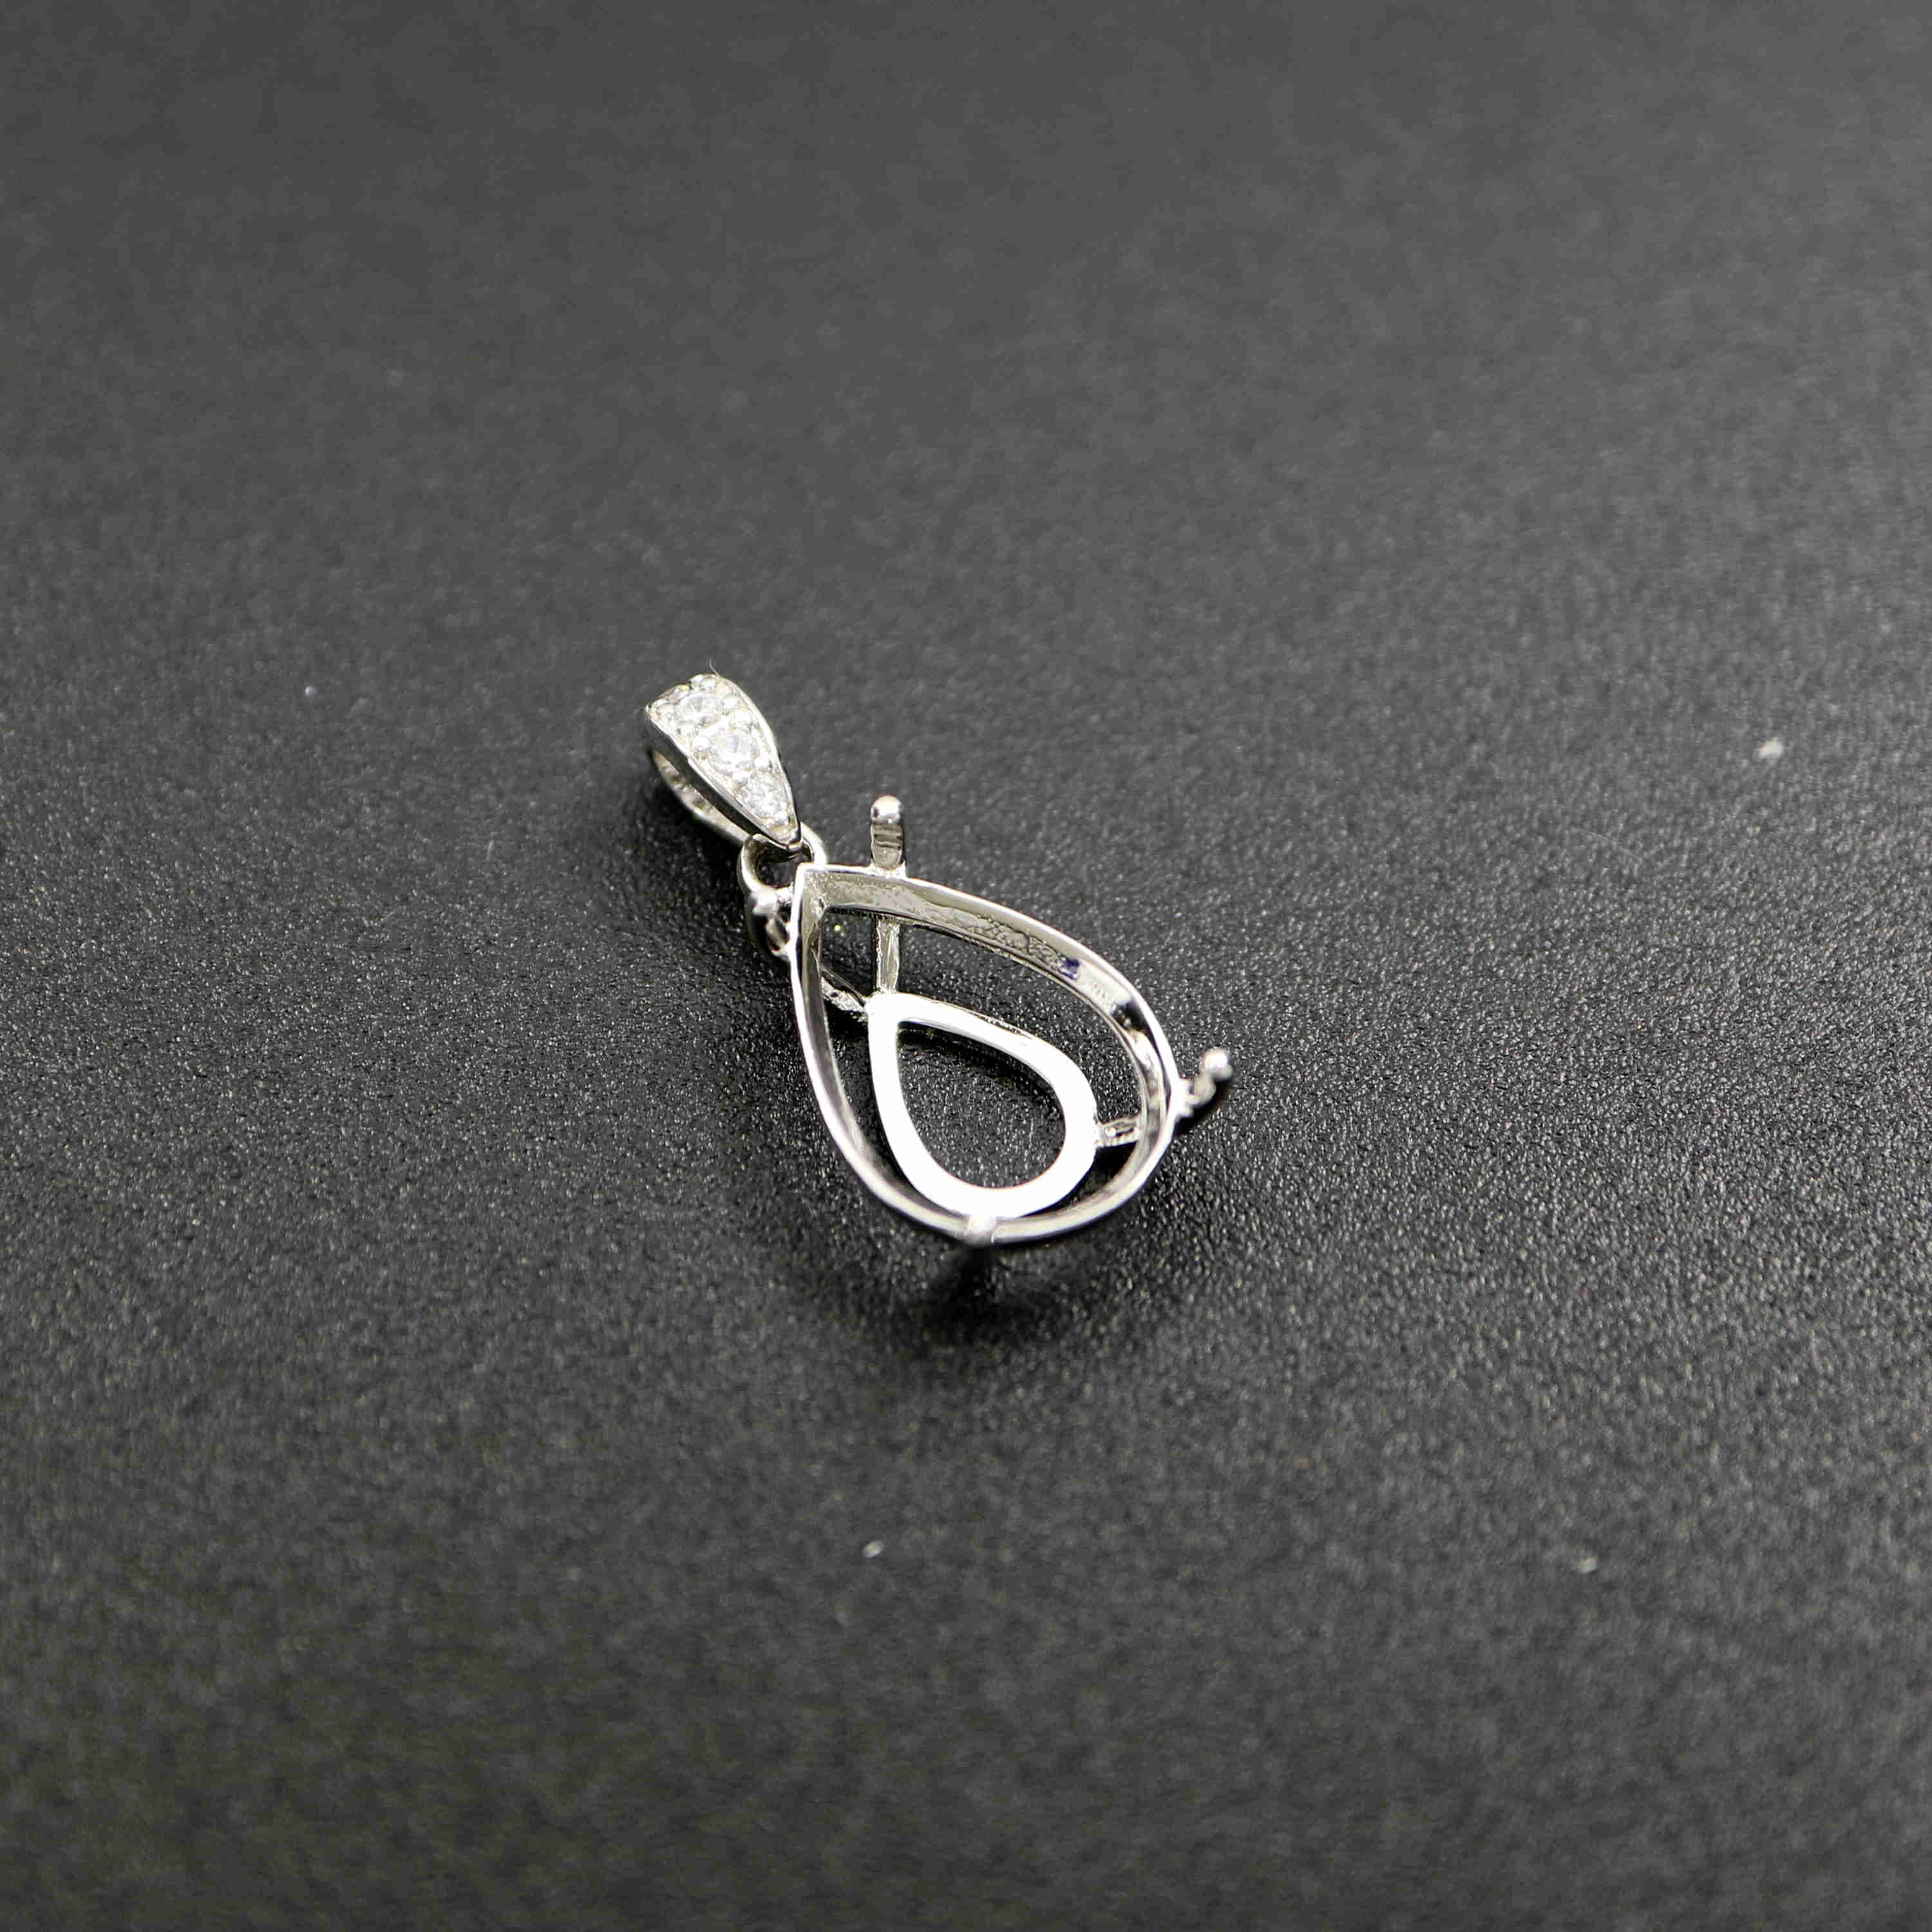 1Pcs Multiple Size Prong Bezel Settings For Tear Pear Drop Shape Gems Facted Cz Stone Solid 925 Sterling Silver DIY Pendant Charm Settings Tray 1431034 - Click Image to Close